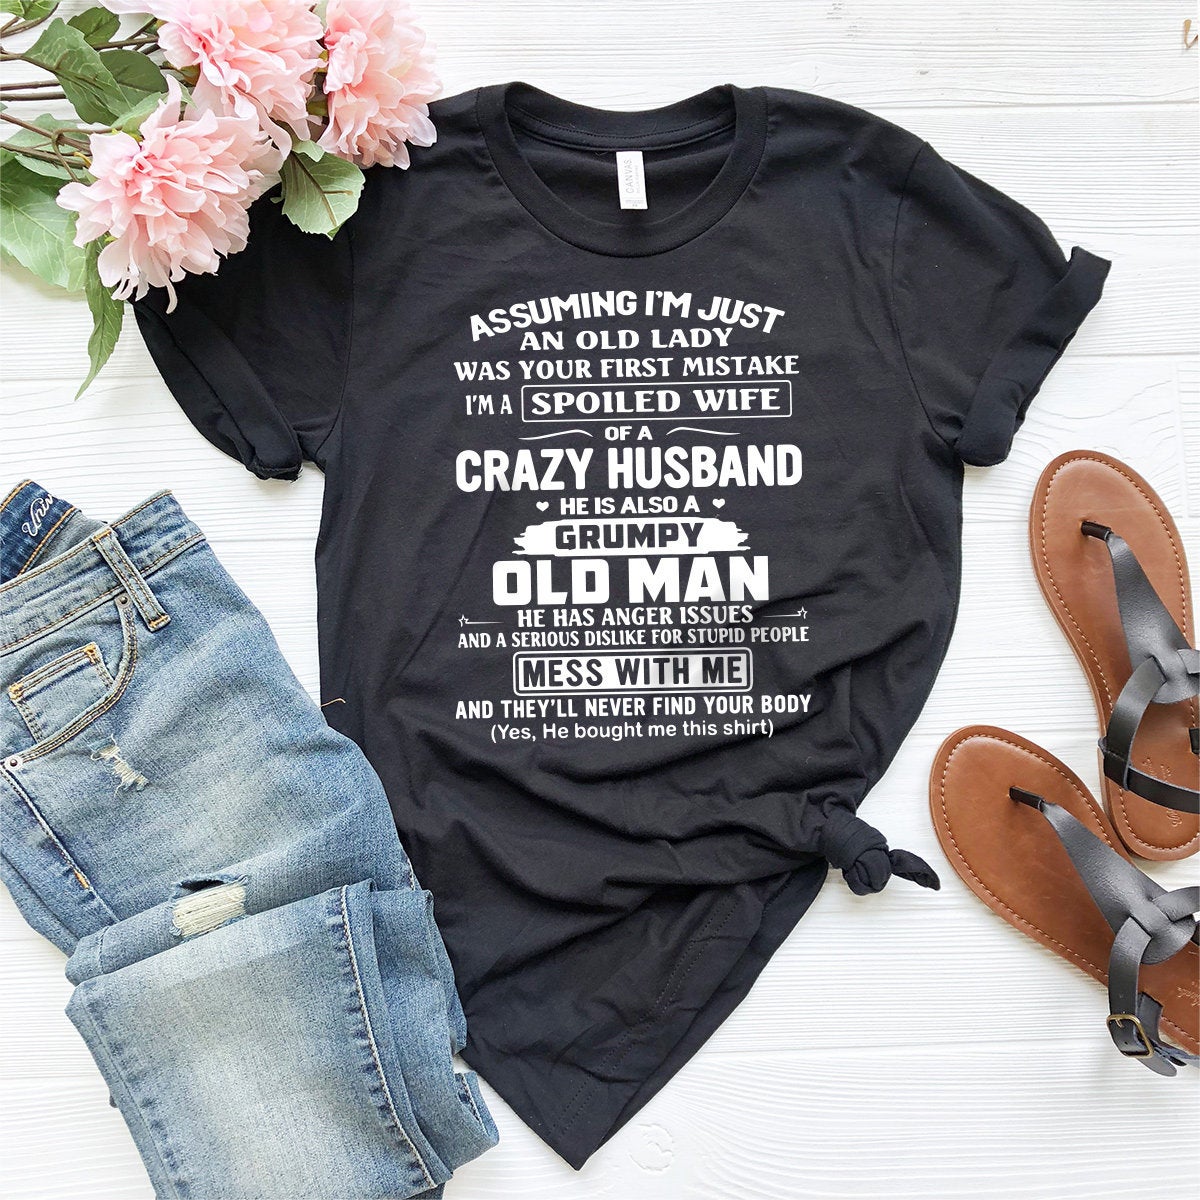 Spoiled Wife Shirt, Wife Shirt, Gift For Wife, Gift From Husband, Old Lady Shirt, Wifey Shirt, Wife Gift, Funny Wife Shirt, Best Wife TShirt - Fastdeliverytees.com